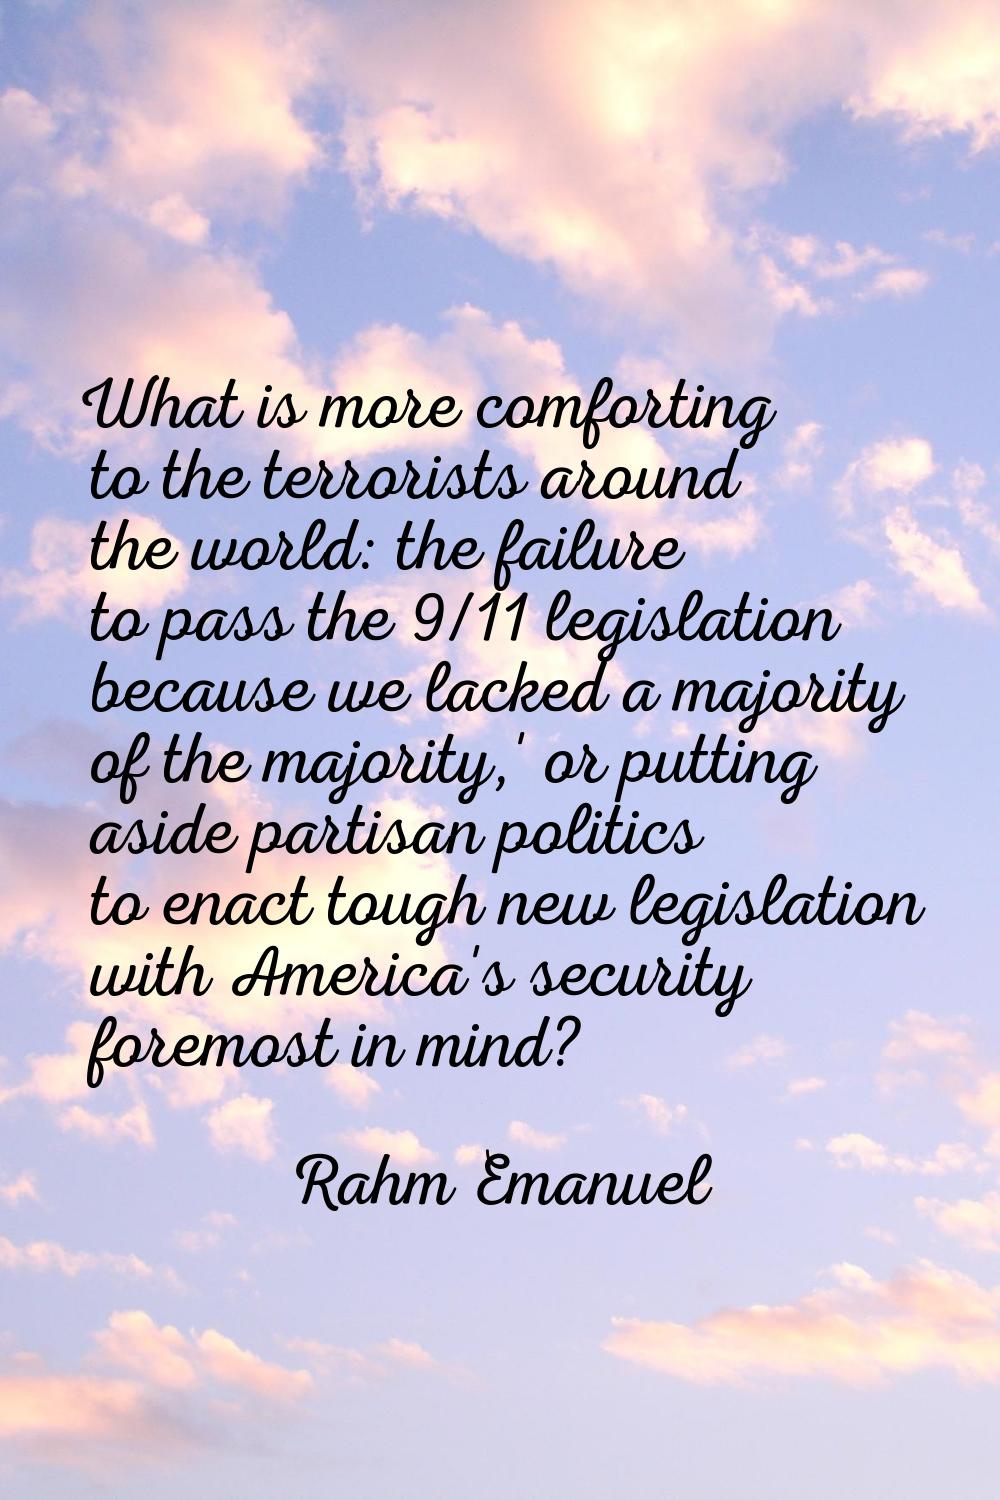 What is more comforting to the terrorists around the world: the failure to pass the 9/11 legislatio